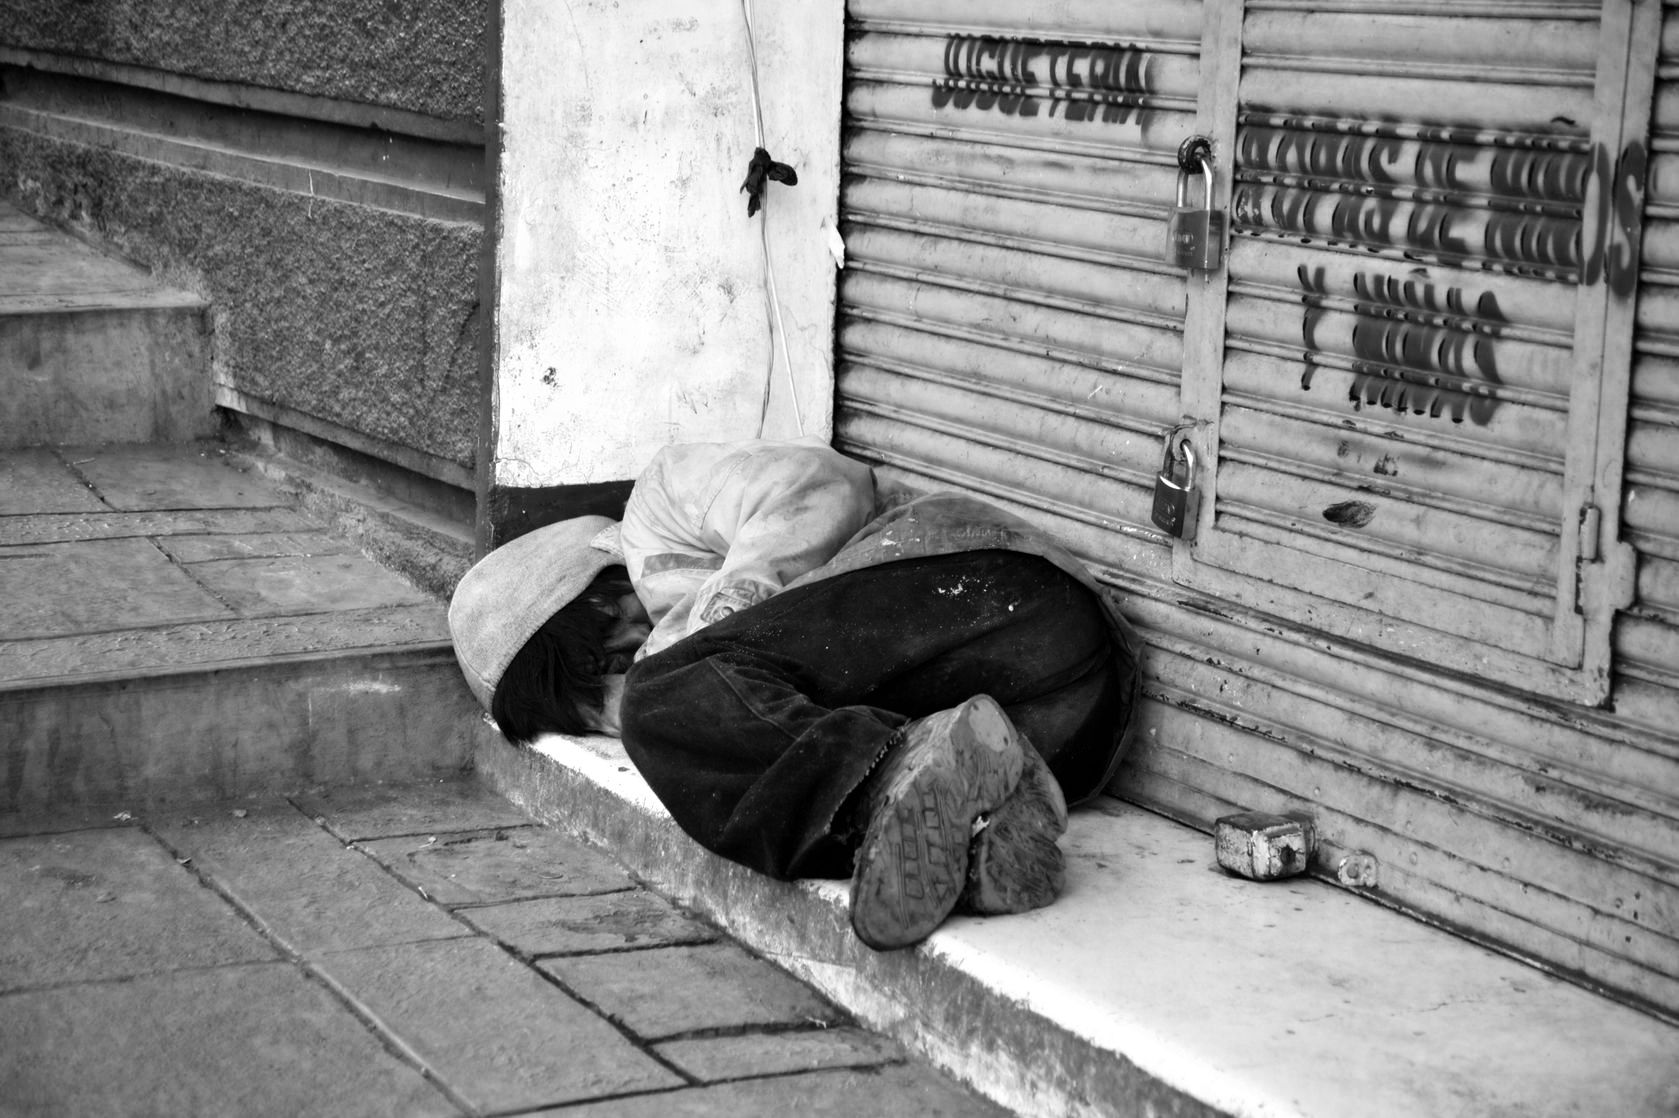 Homeless on the streets of La Paz. | Ladyclever